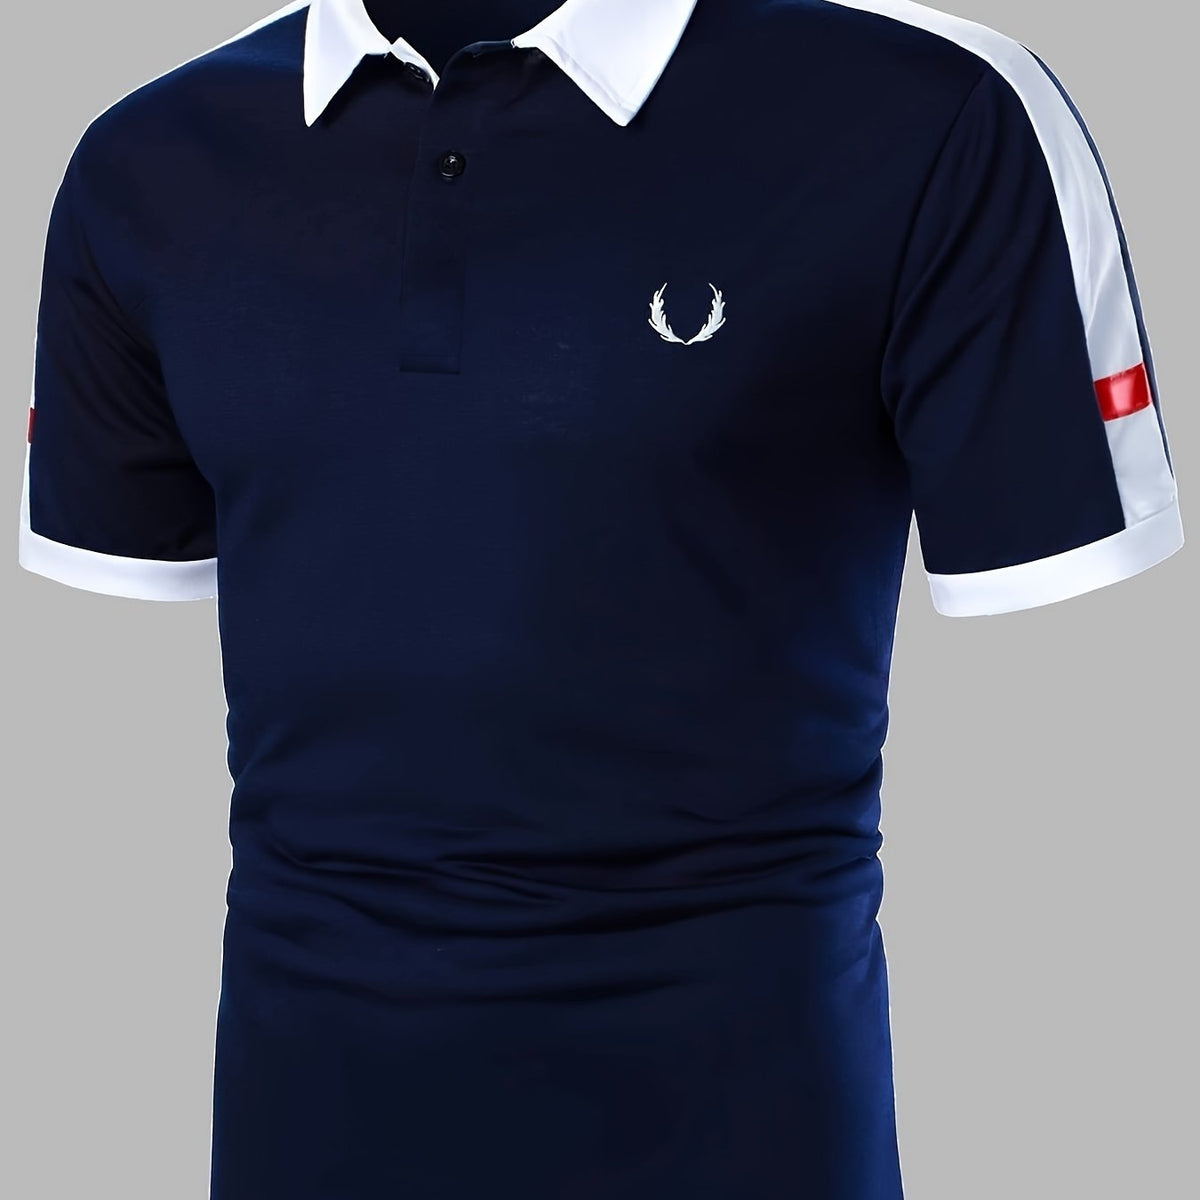 「lovevop」Men's Slim Fit Casual Navy Polo Shirt Best Sellers